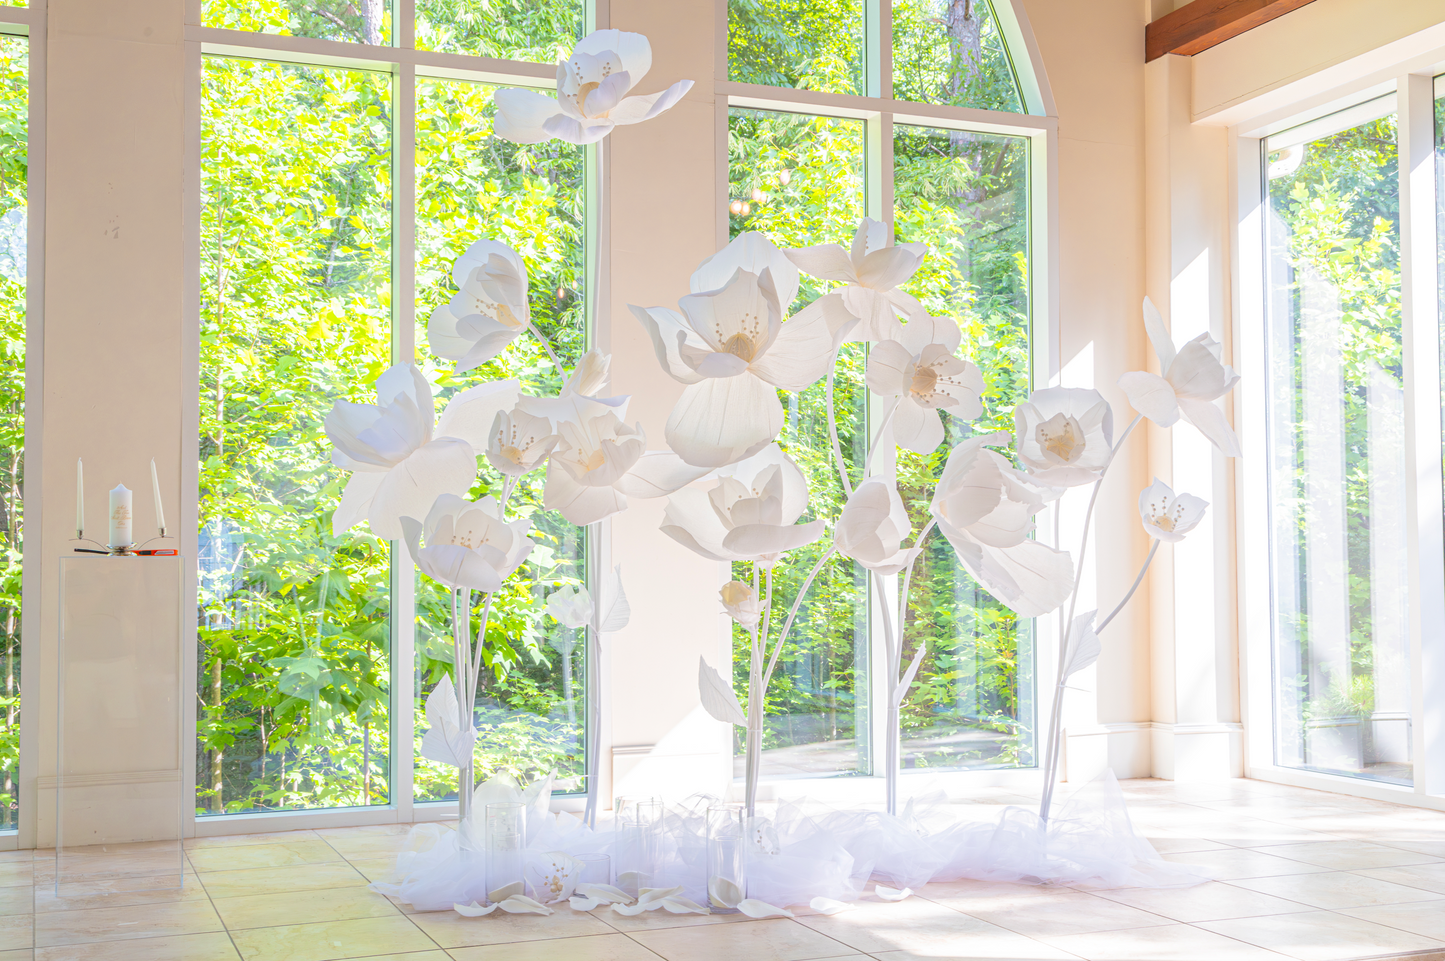 Giant White Flowers for wedding decoration